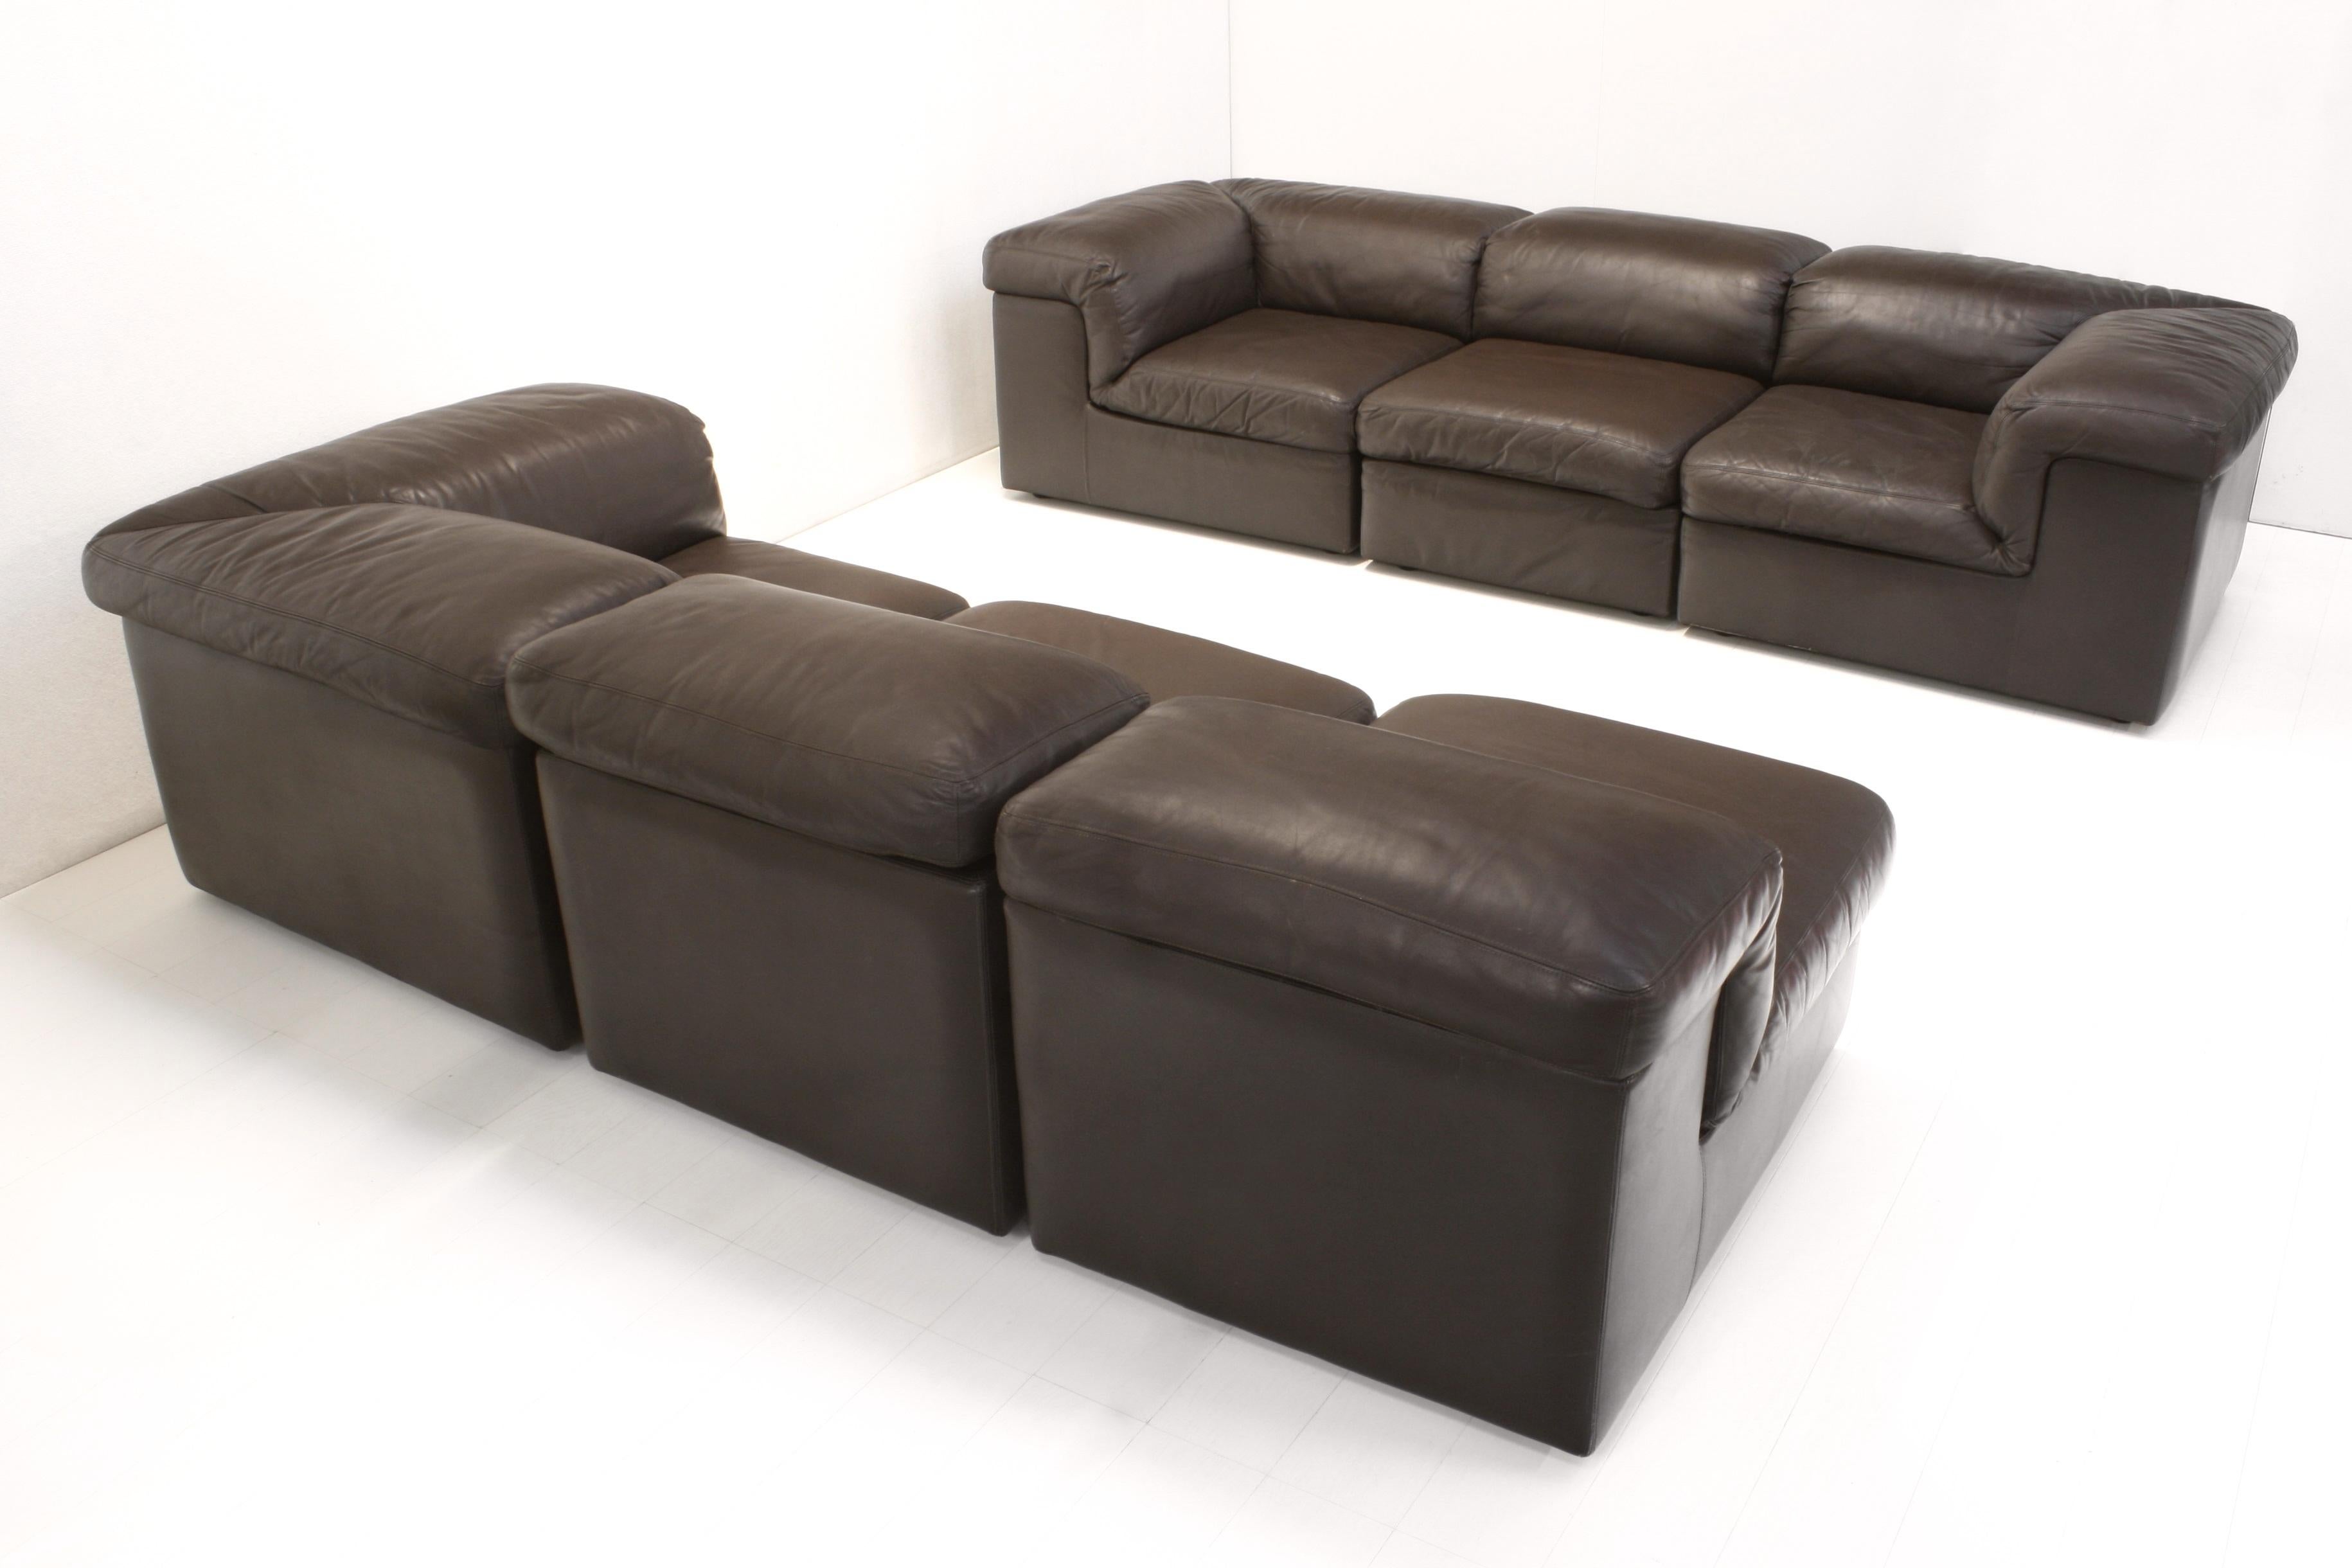 Belgian Modular Brown Leather Jeep Sectional Sofa by Anita Schmidt for Durlet, 1970s For Sale